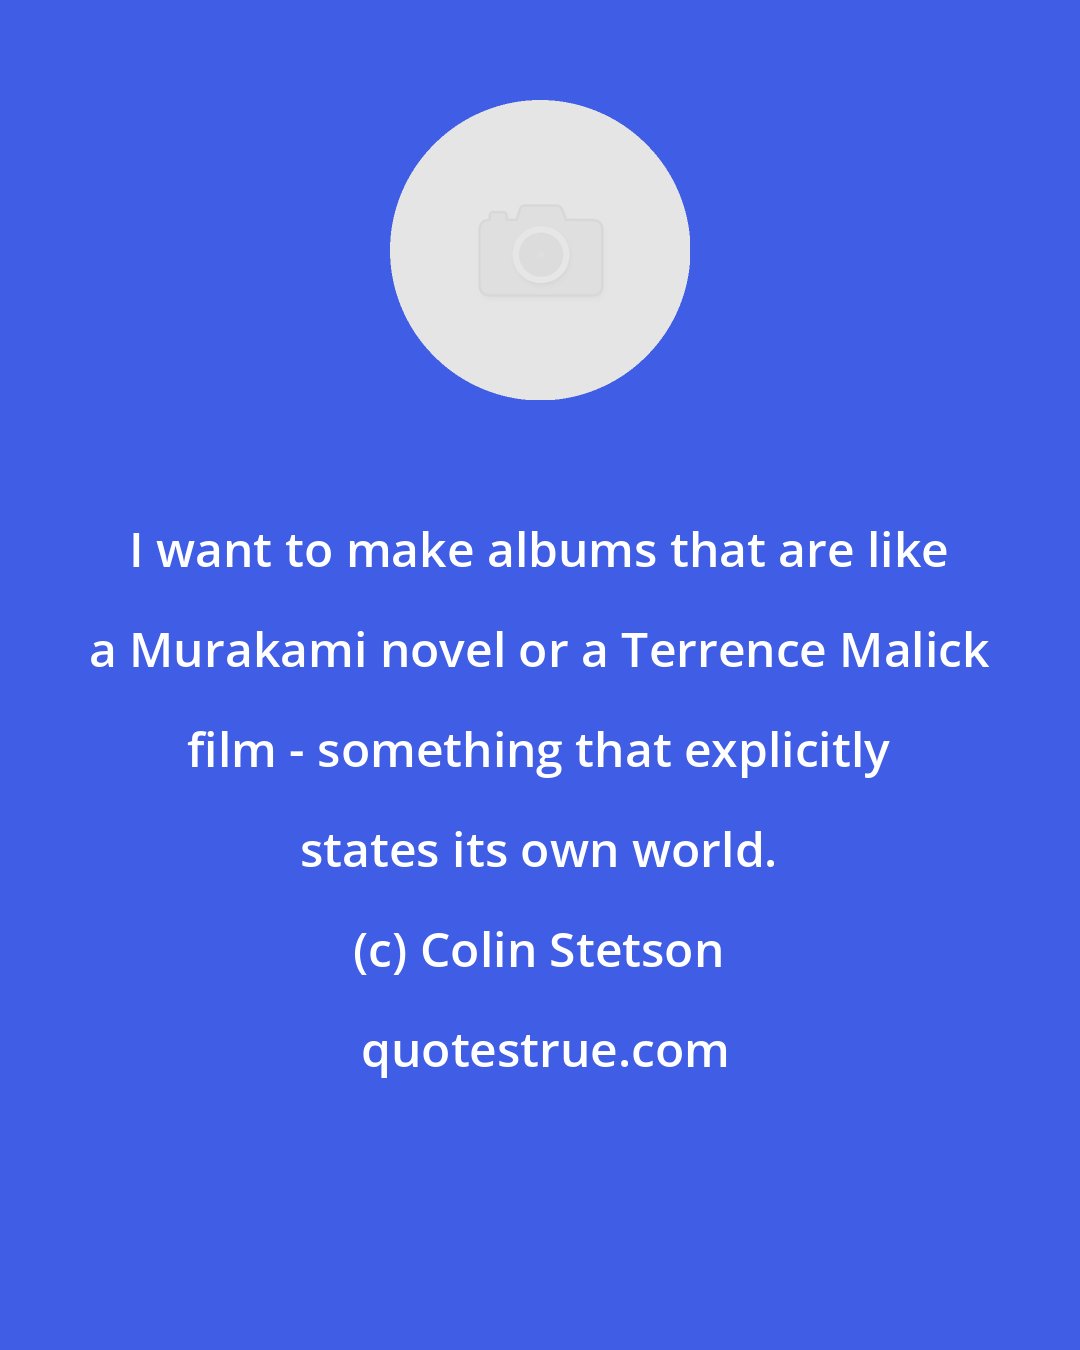 Colin Stetson: I want to make albums that are like a Murakami novel or a Terrence Malick film - something that explicitly states its own world.